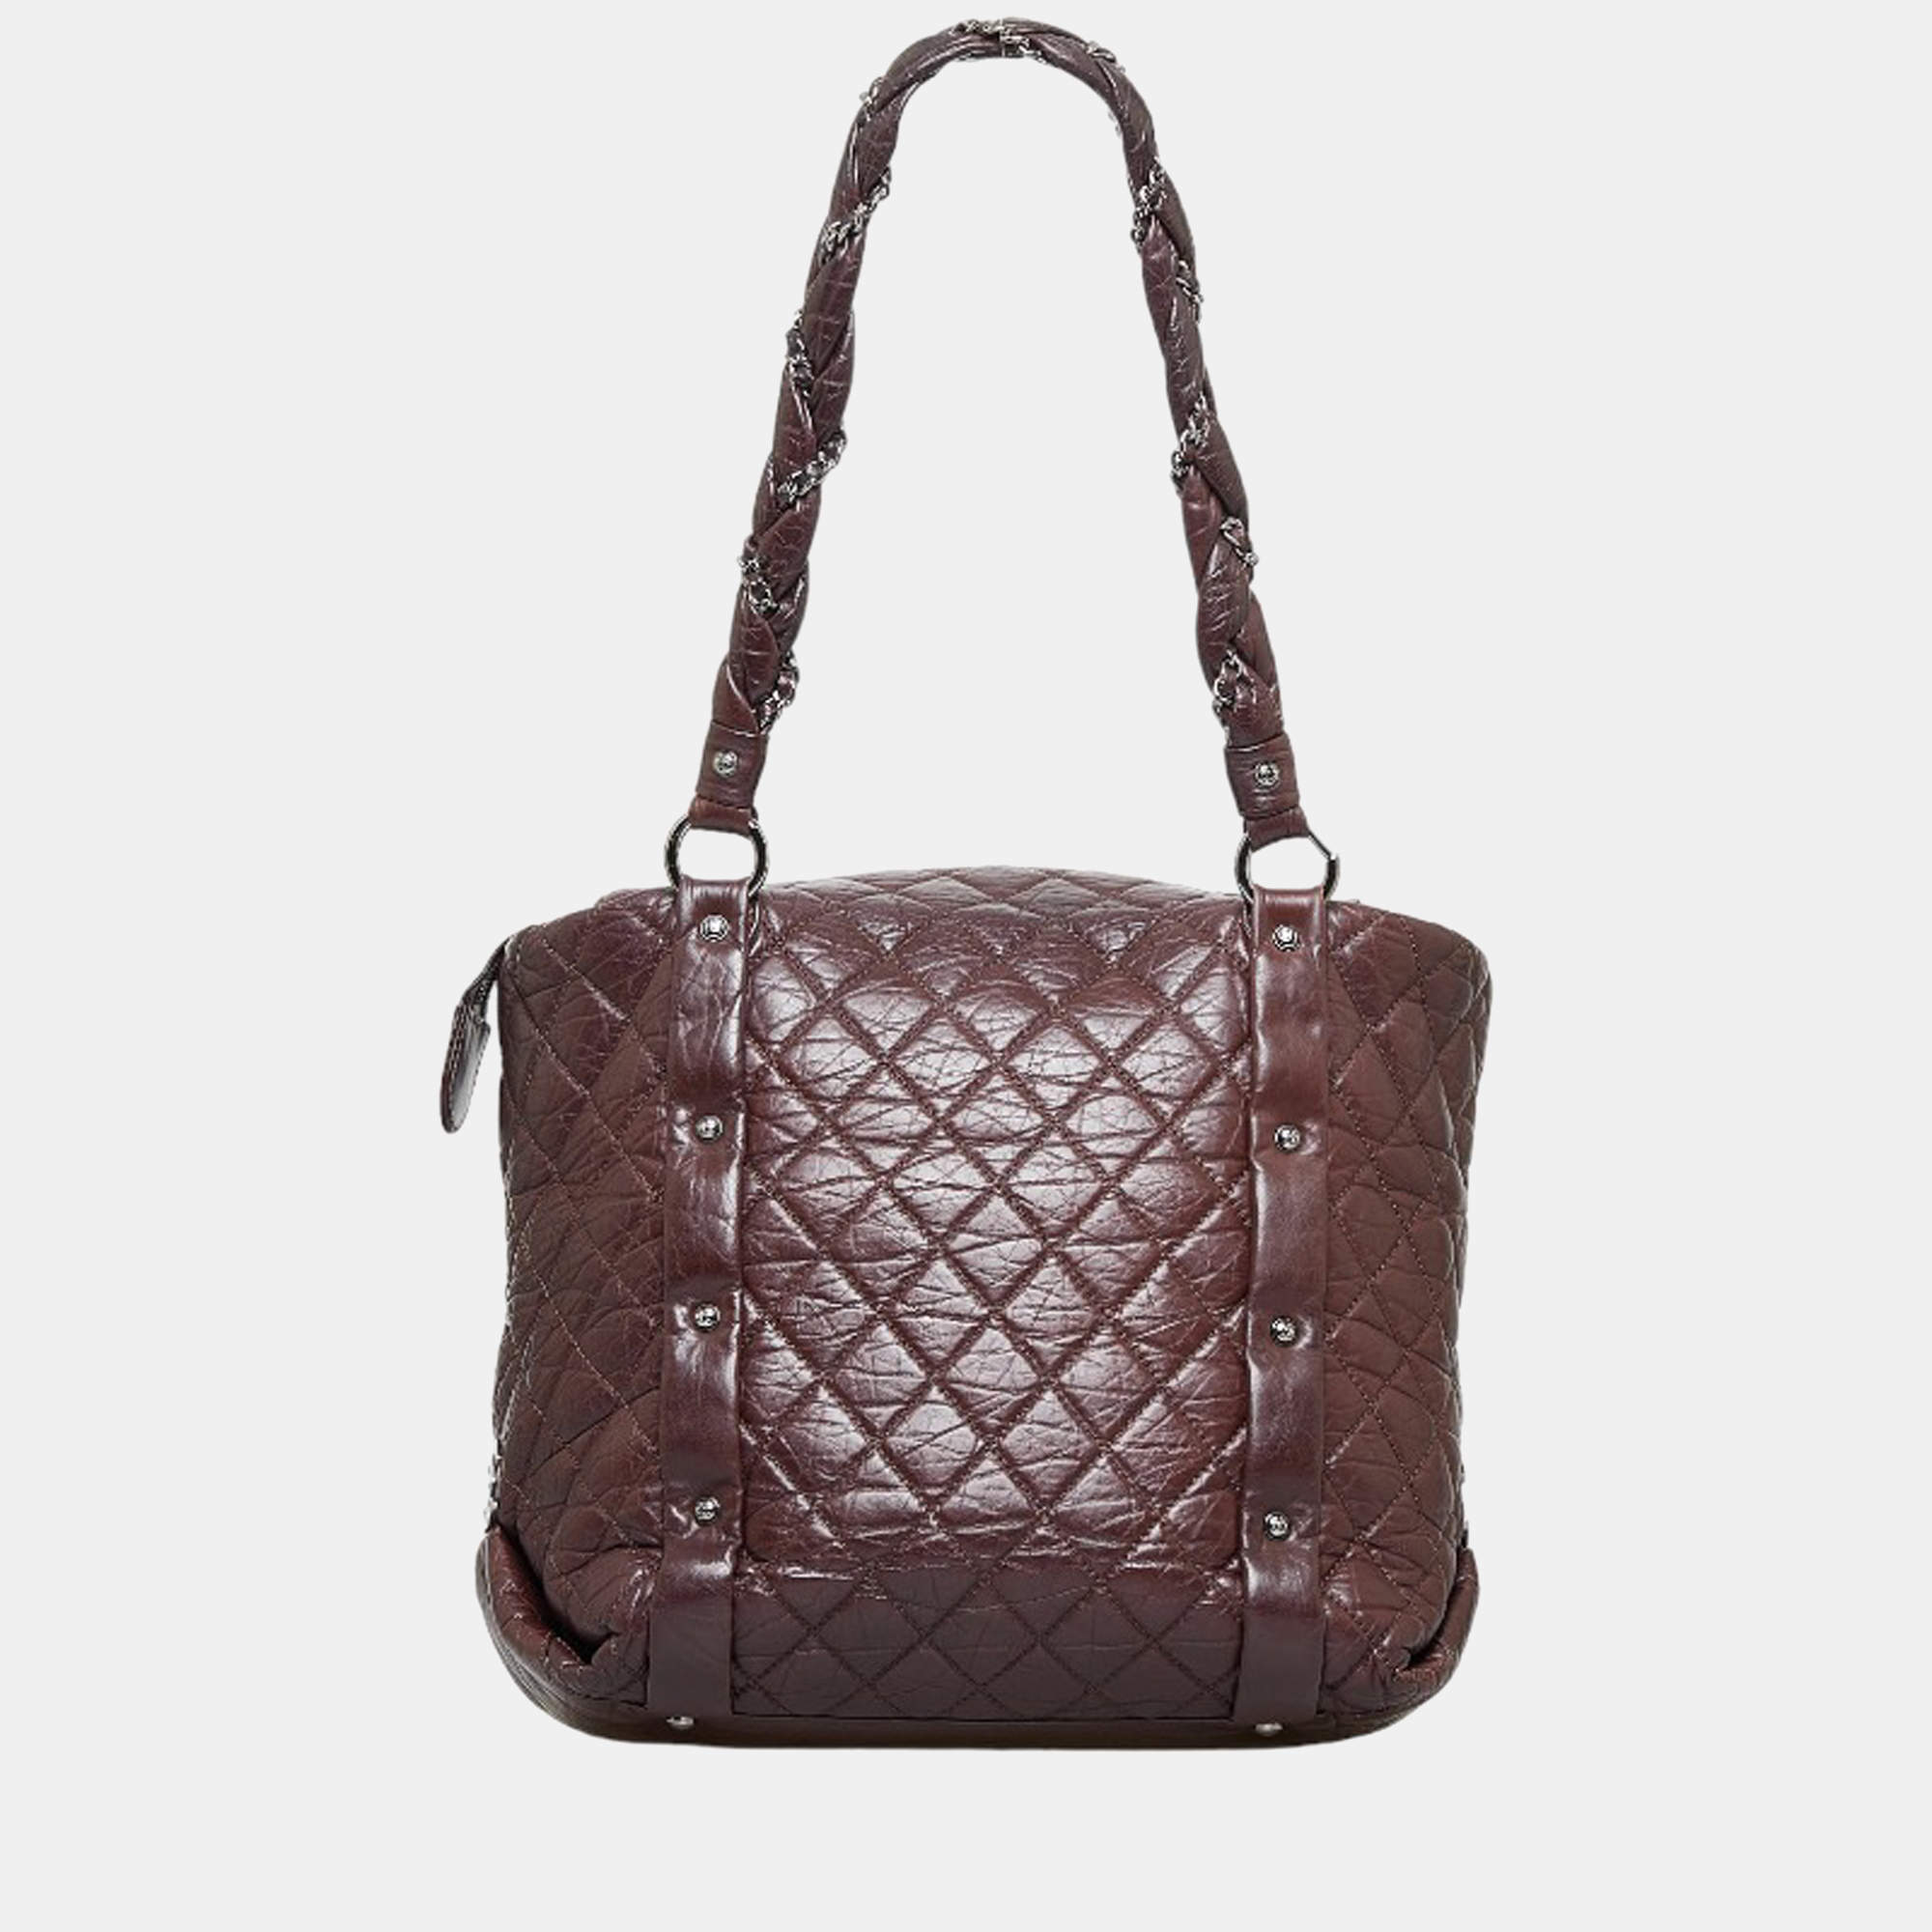 Chanel Brown Animal skin Quilted Leather Lady Braid Tote Tote Bag